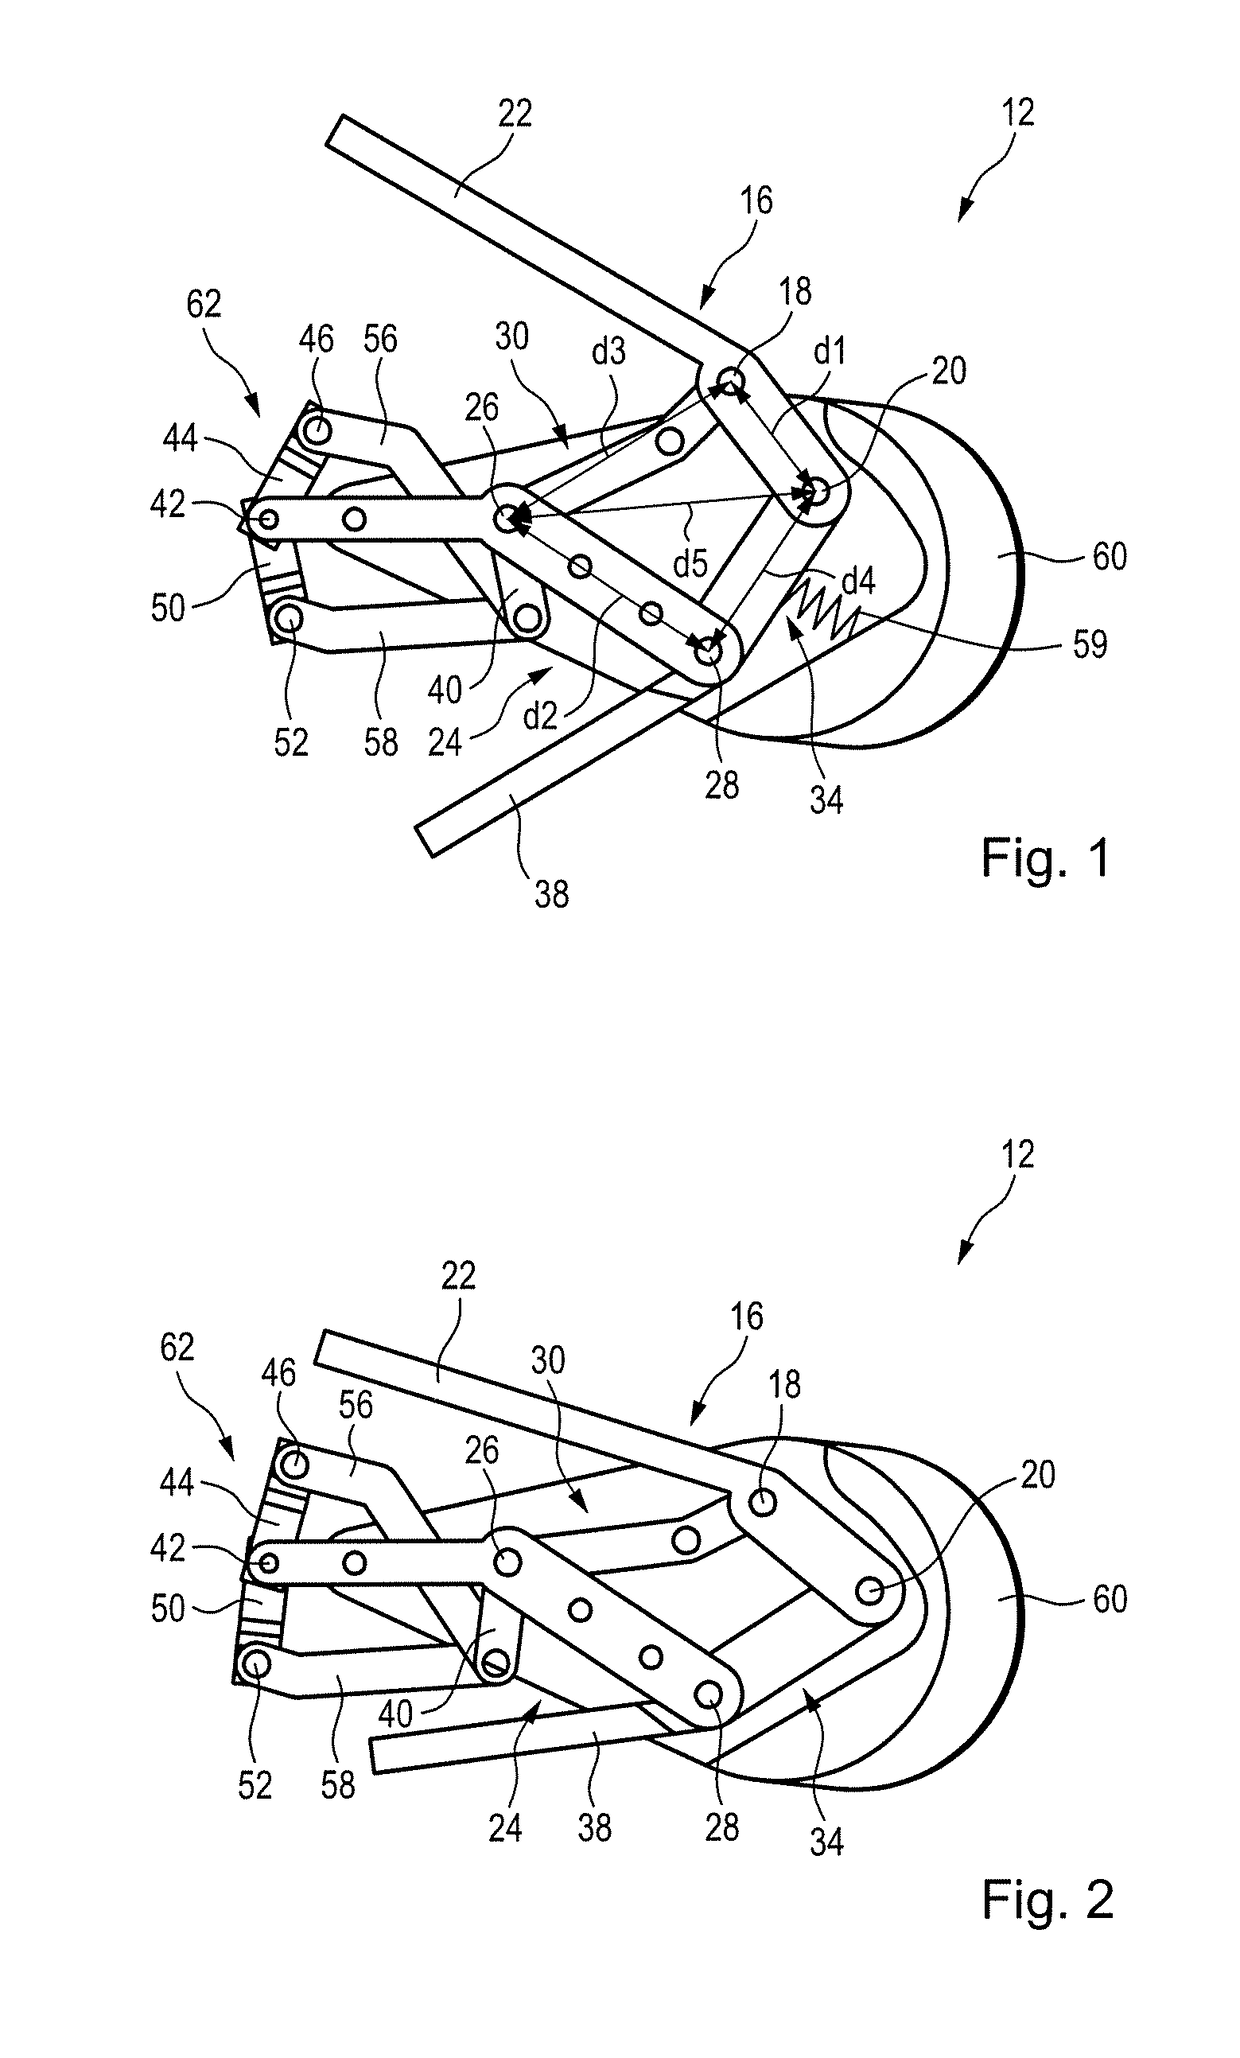 Surgical instrument with a manual control